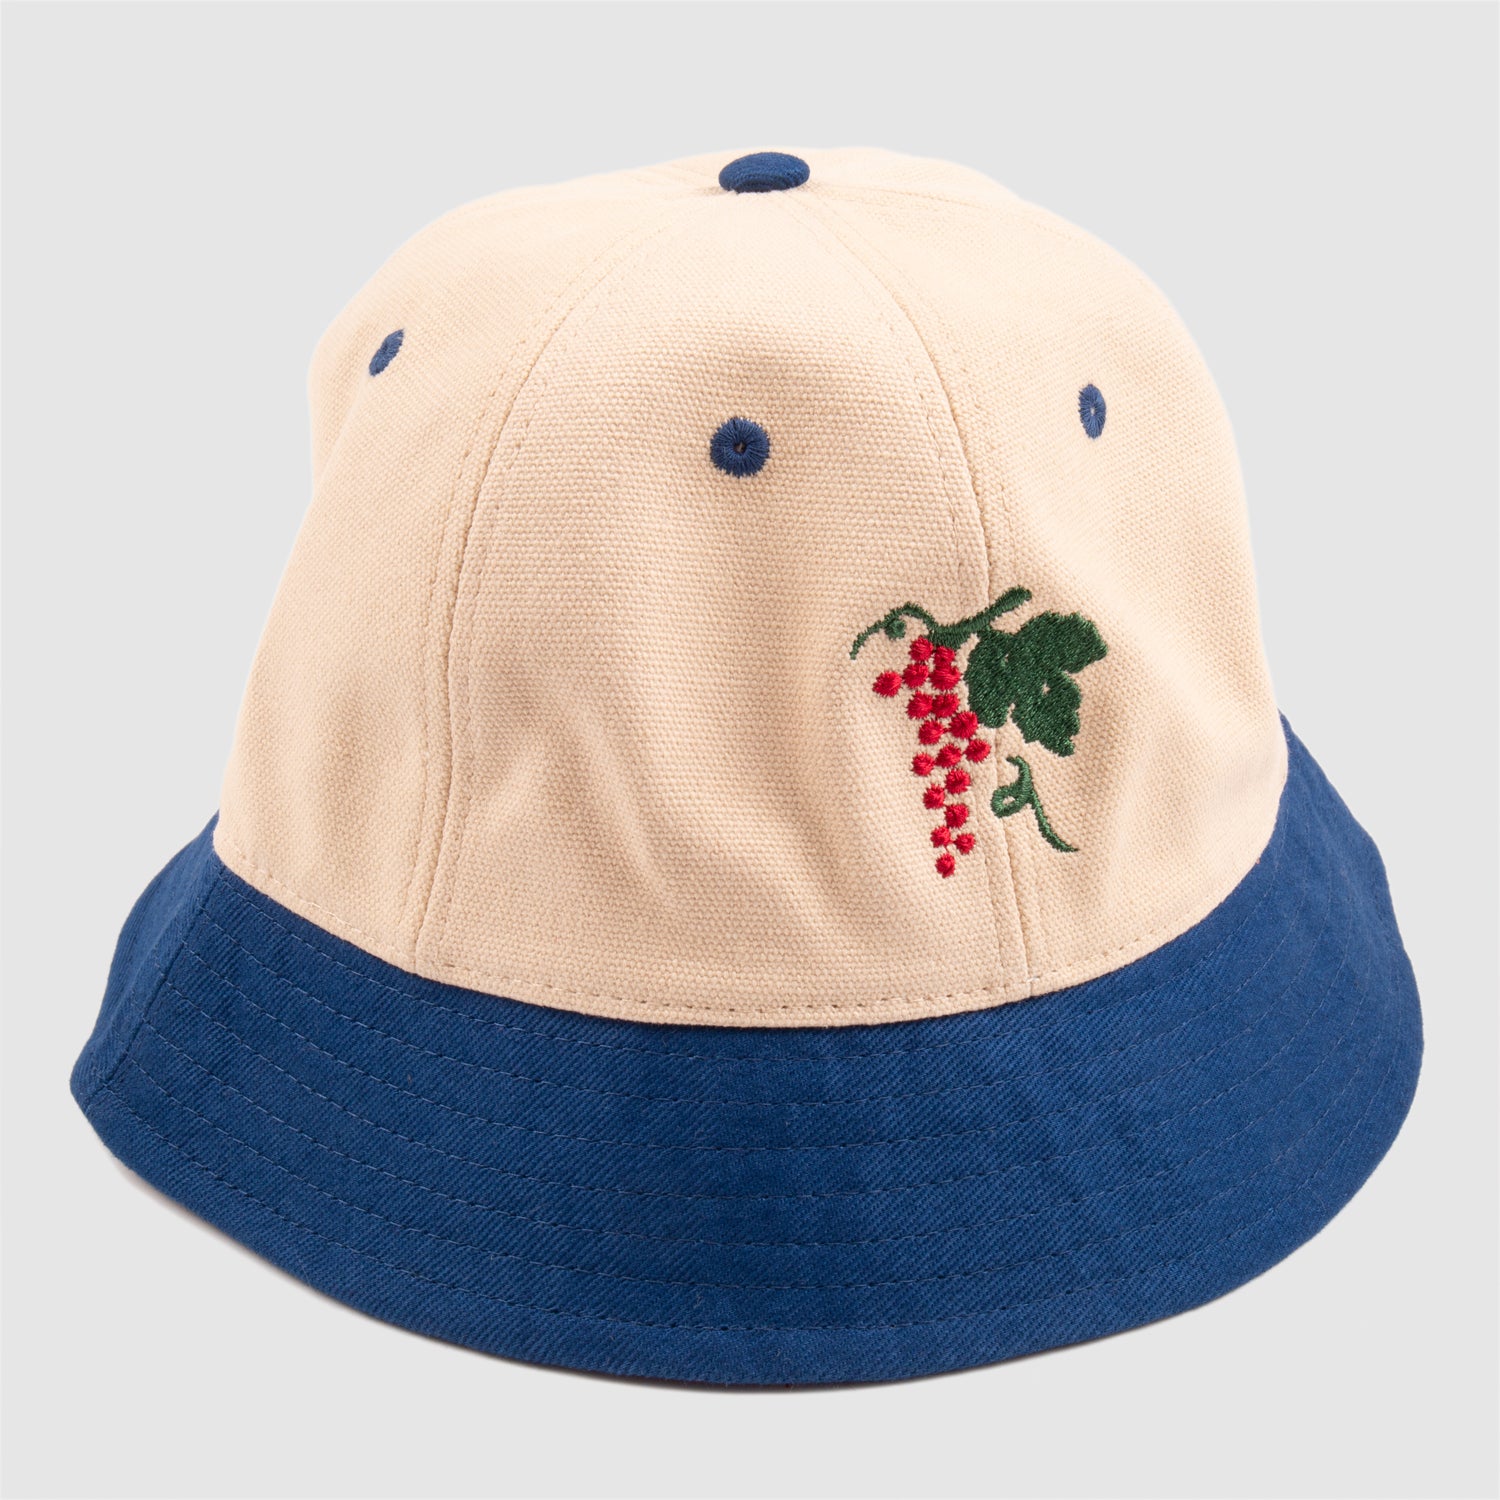 PASS~PORT "LIFE OF LEISURE" BUCKET HAT NATURAL/ROYAL